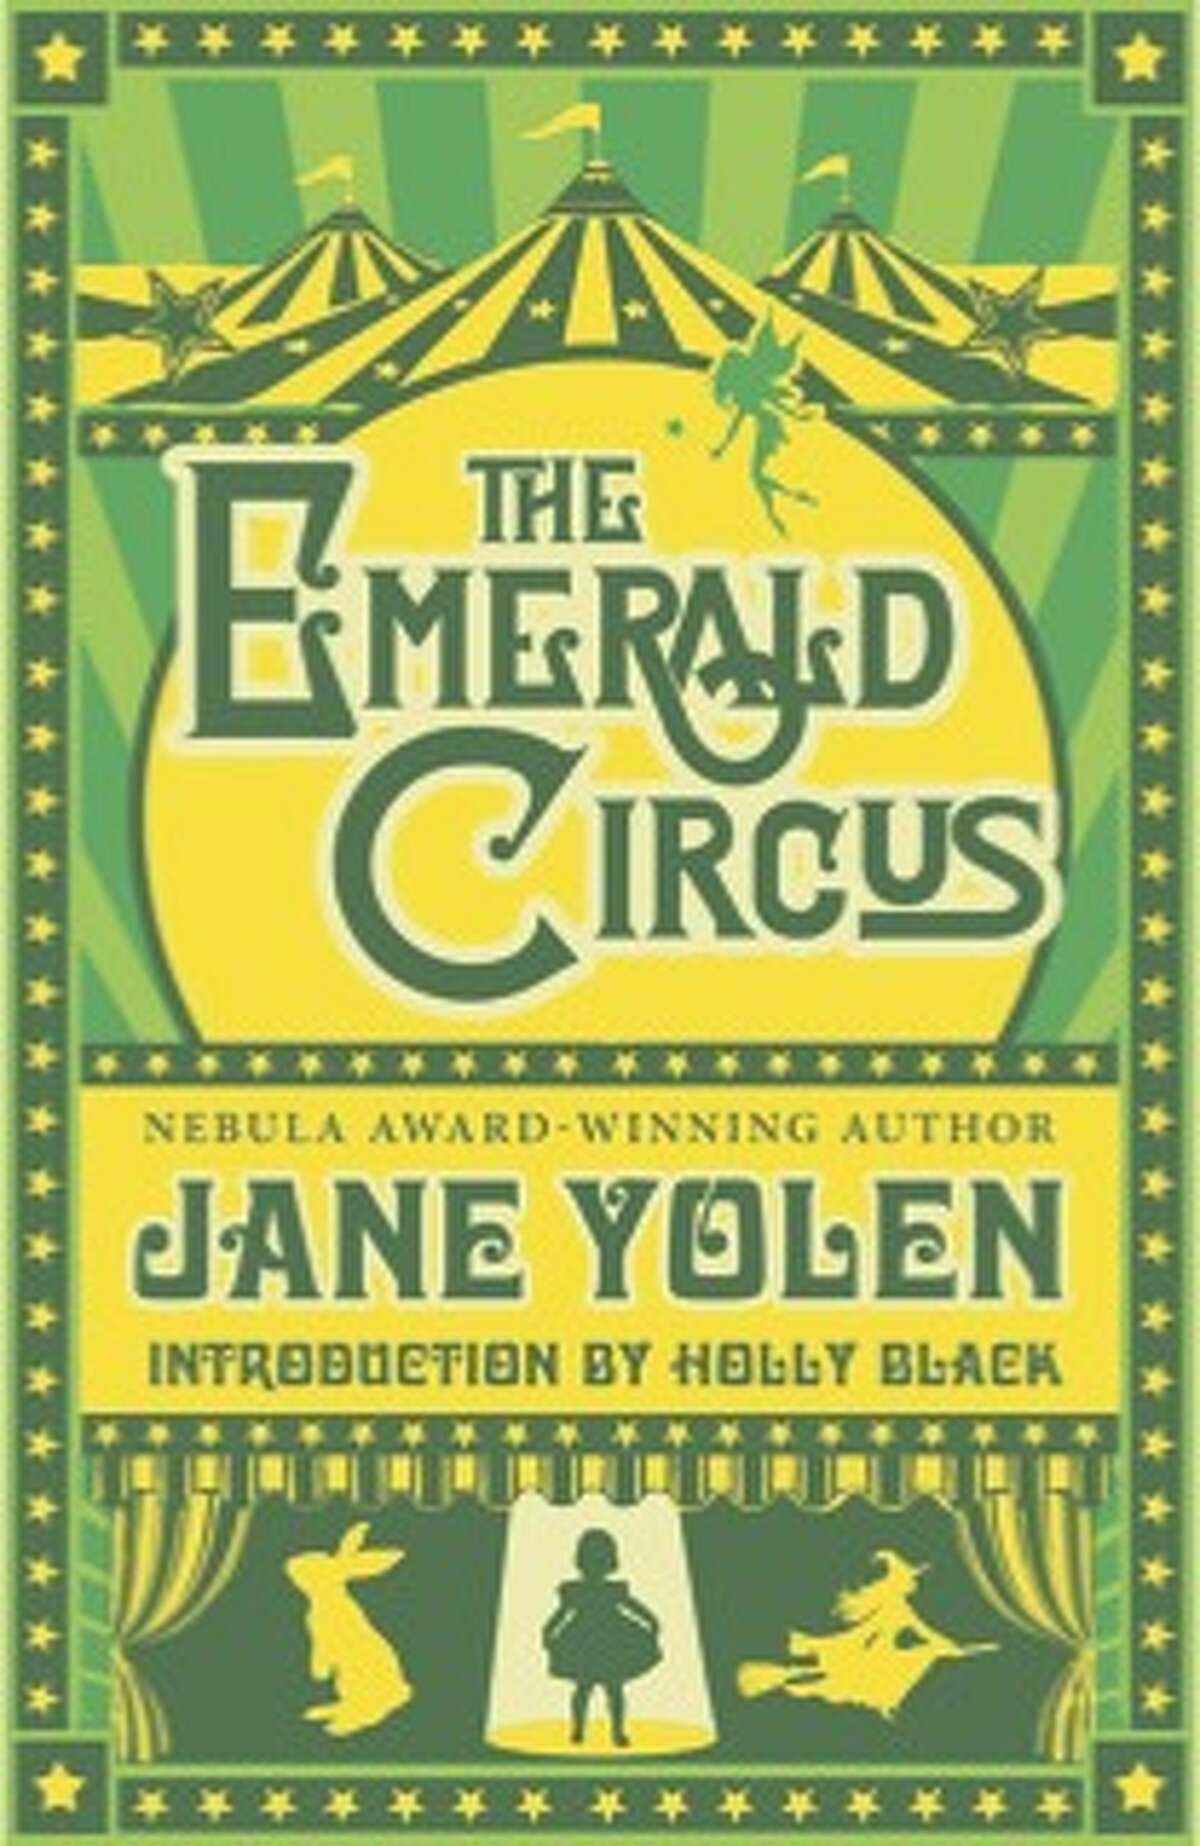 "The Emerald Circus," a novel by Jane Yolen, who will appear at the Northshire Book Store in Saratoga Springs on Friday, April 27. (Provided)